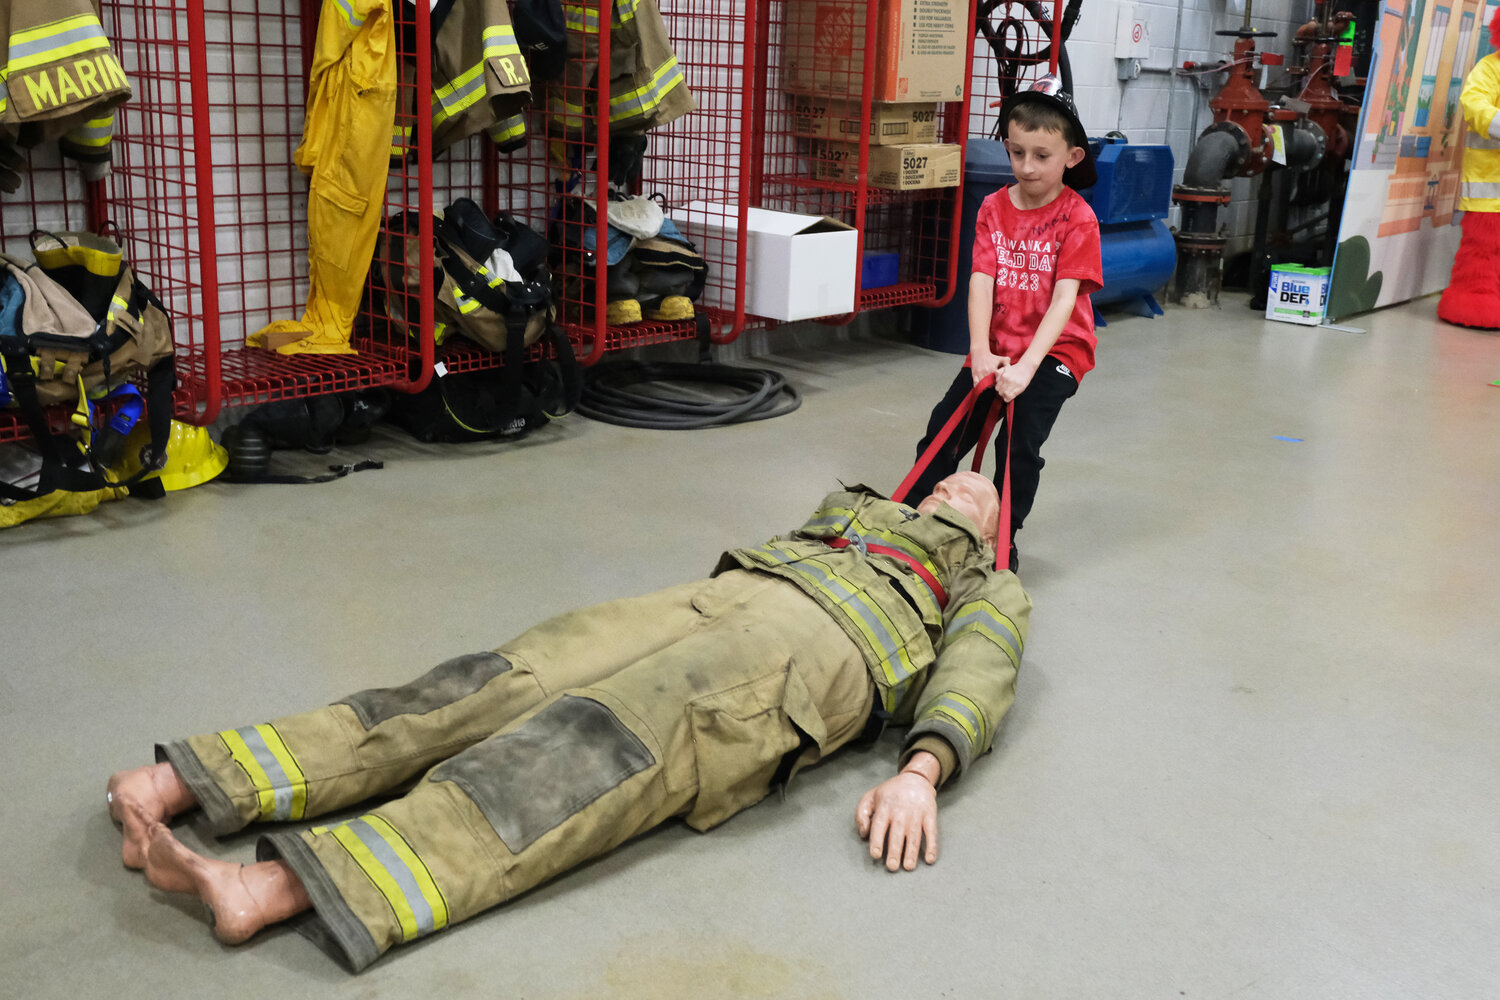 Eight-year-old Jude Todd does the body drag at Langhorne-Middletown Fire Company Station 22.